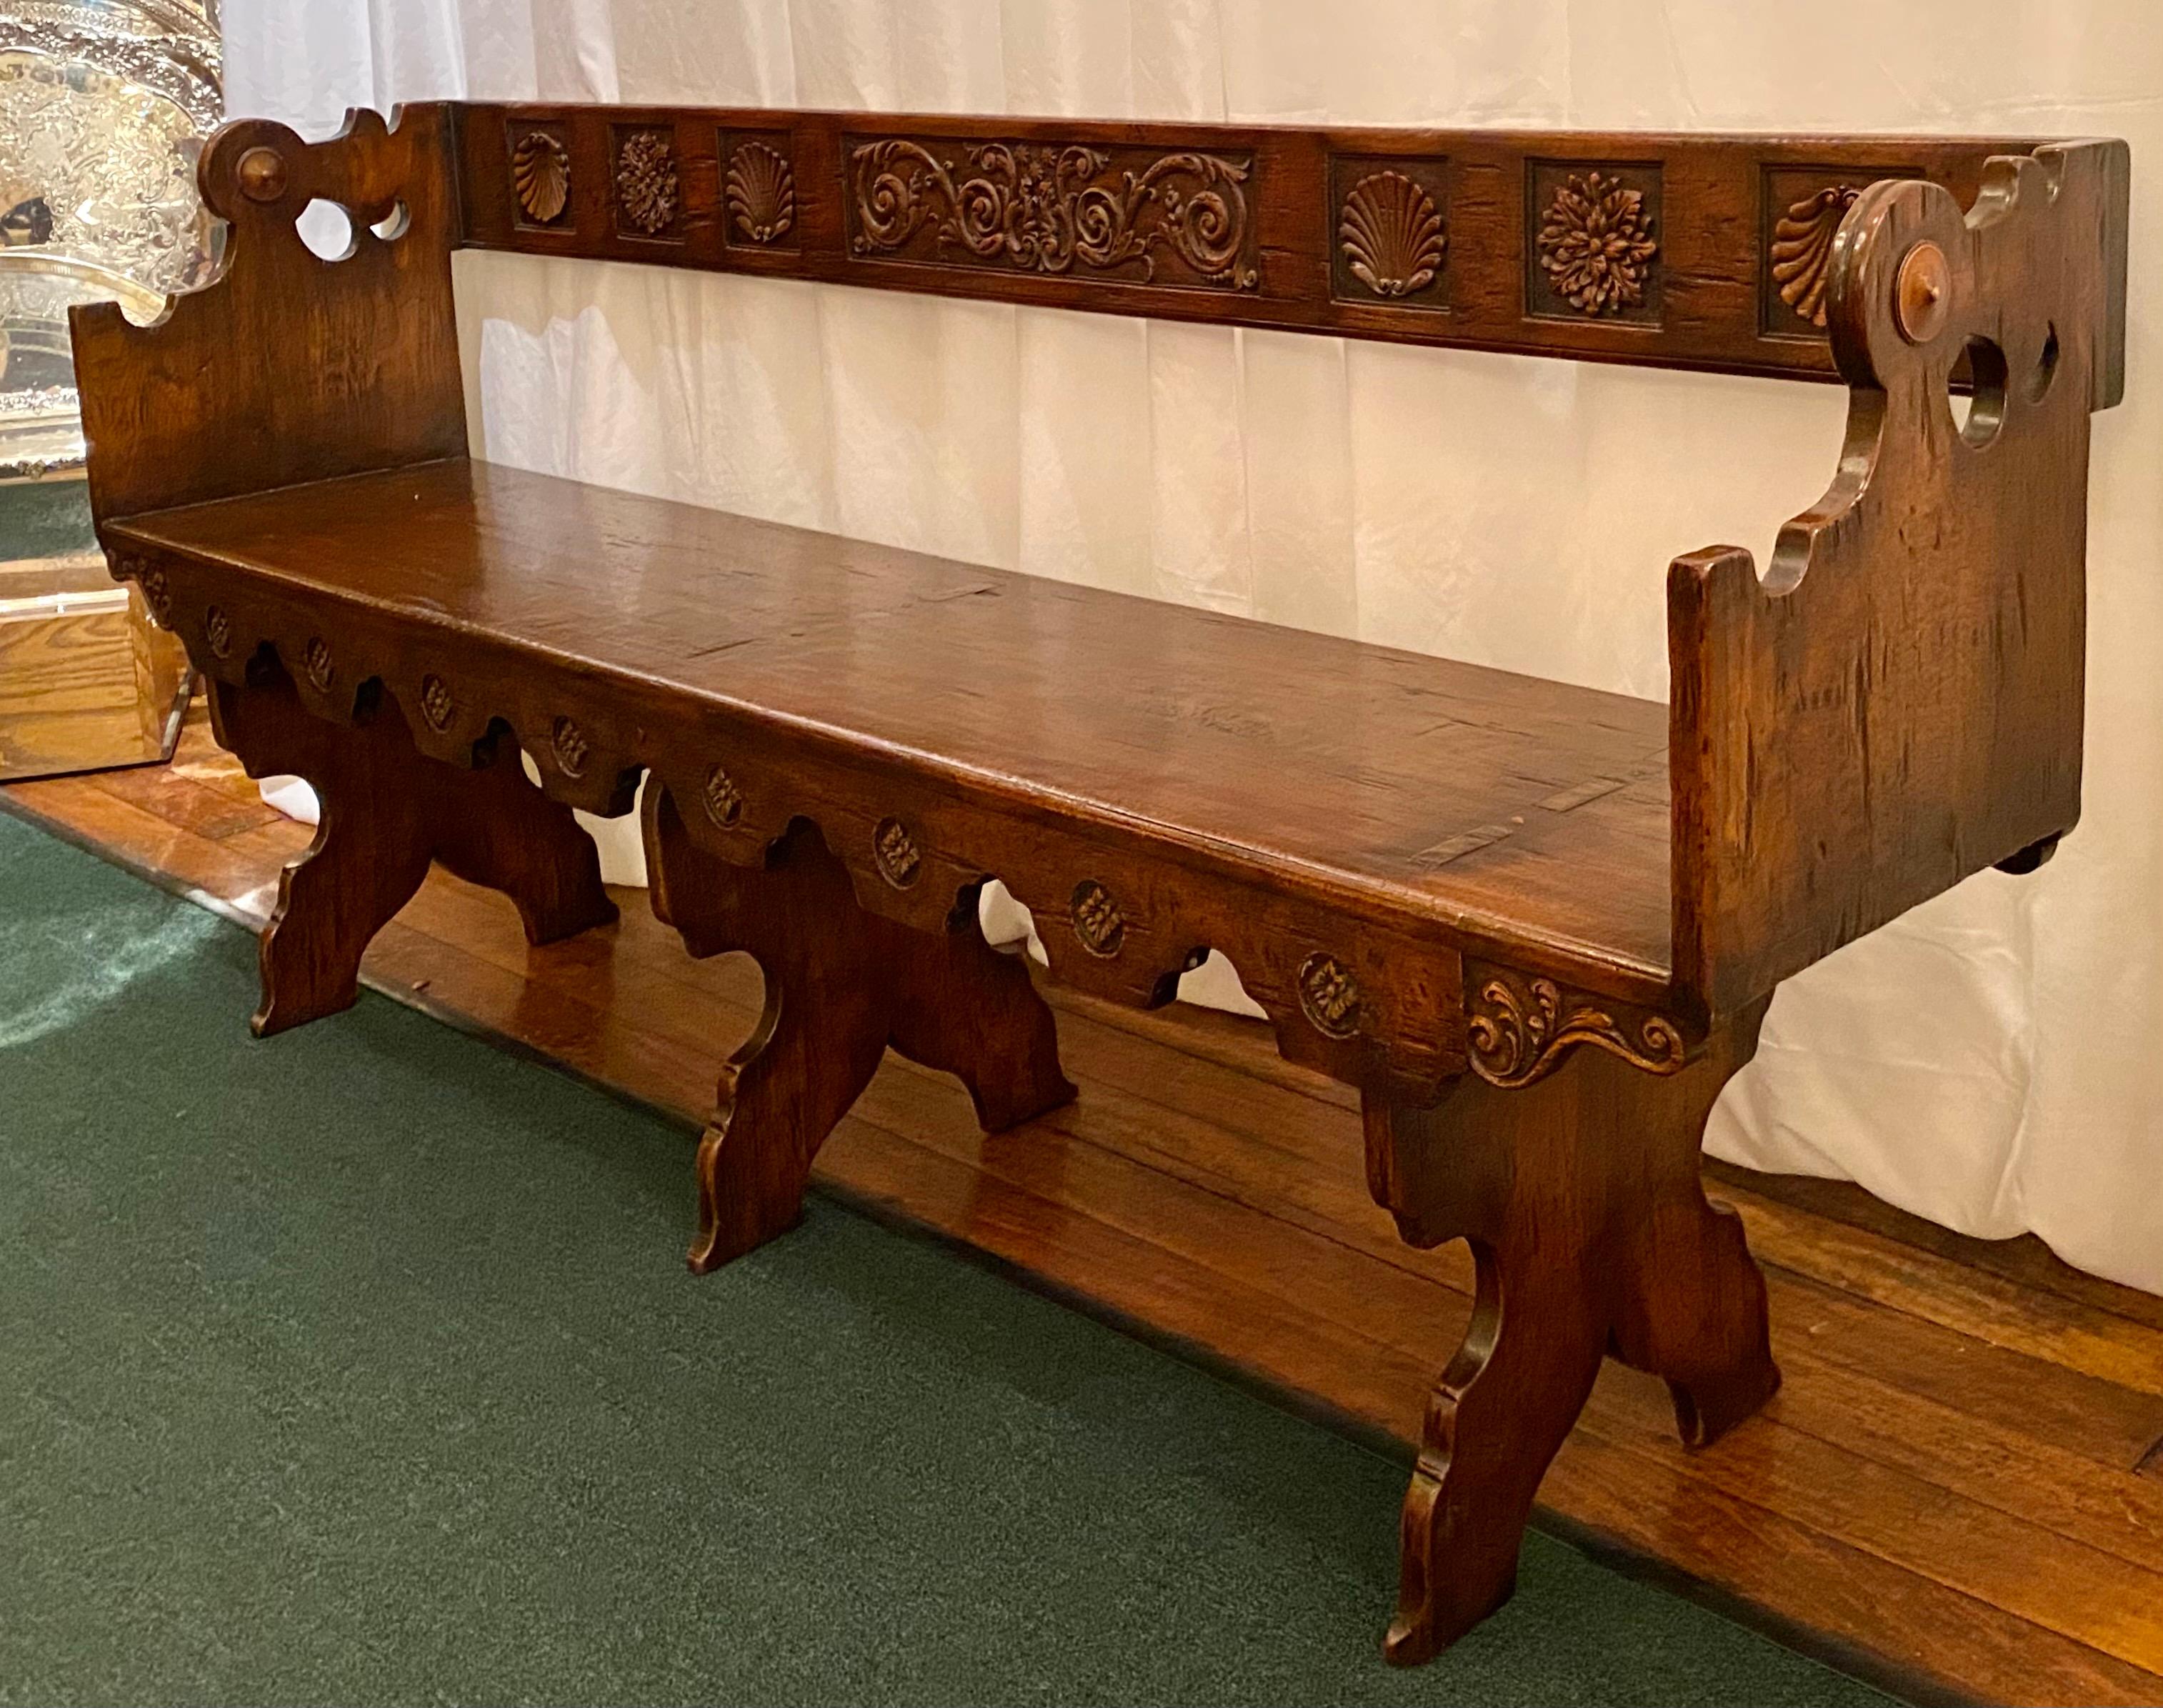 Antique 19th Century French Carved Walnut Banquette Bench, circa 1880 In Good Condition For Sale In New Orleans, LA